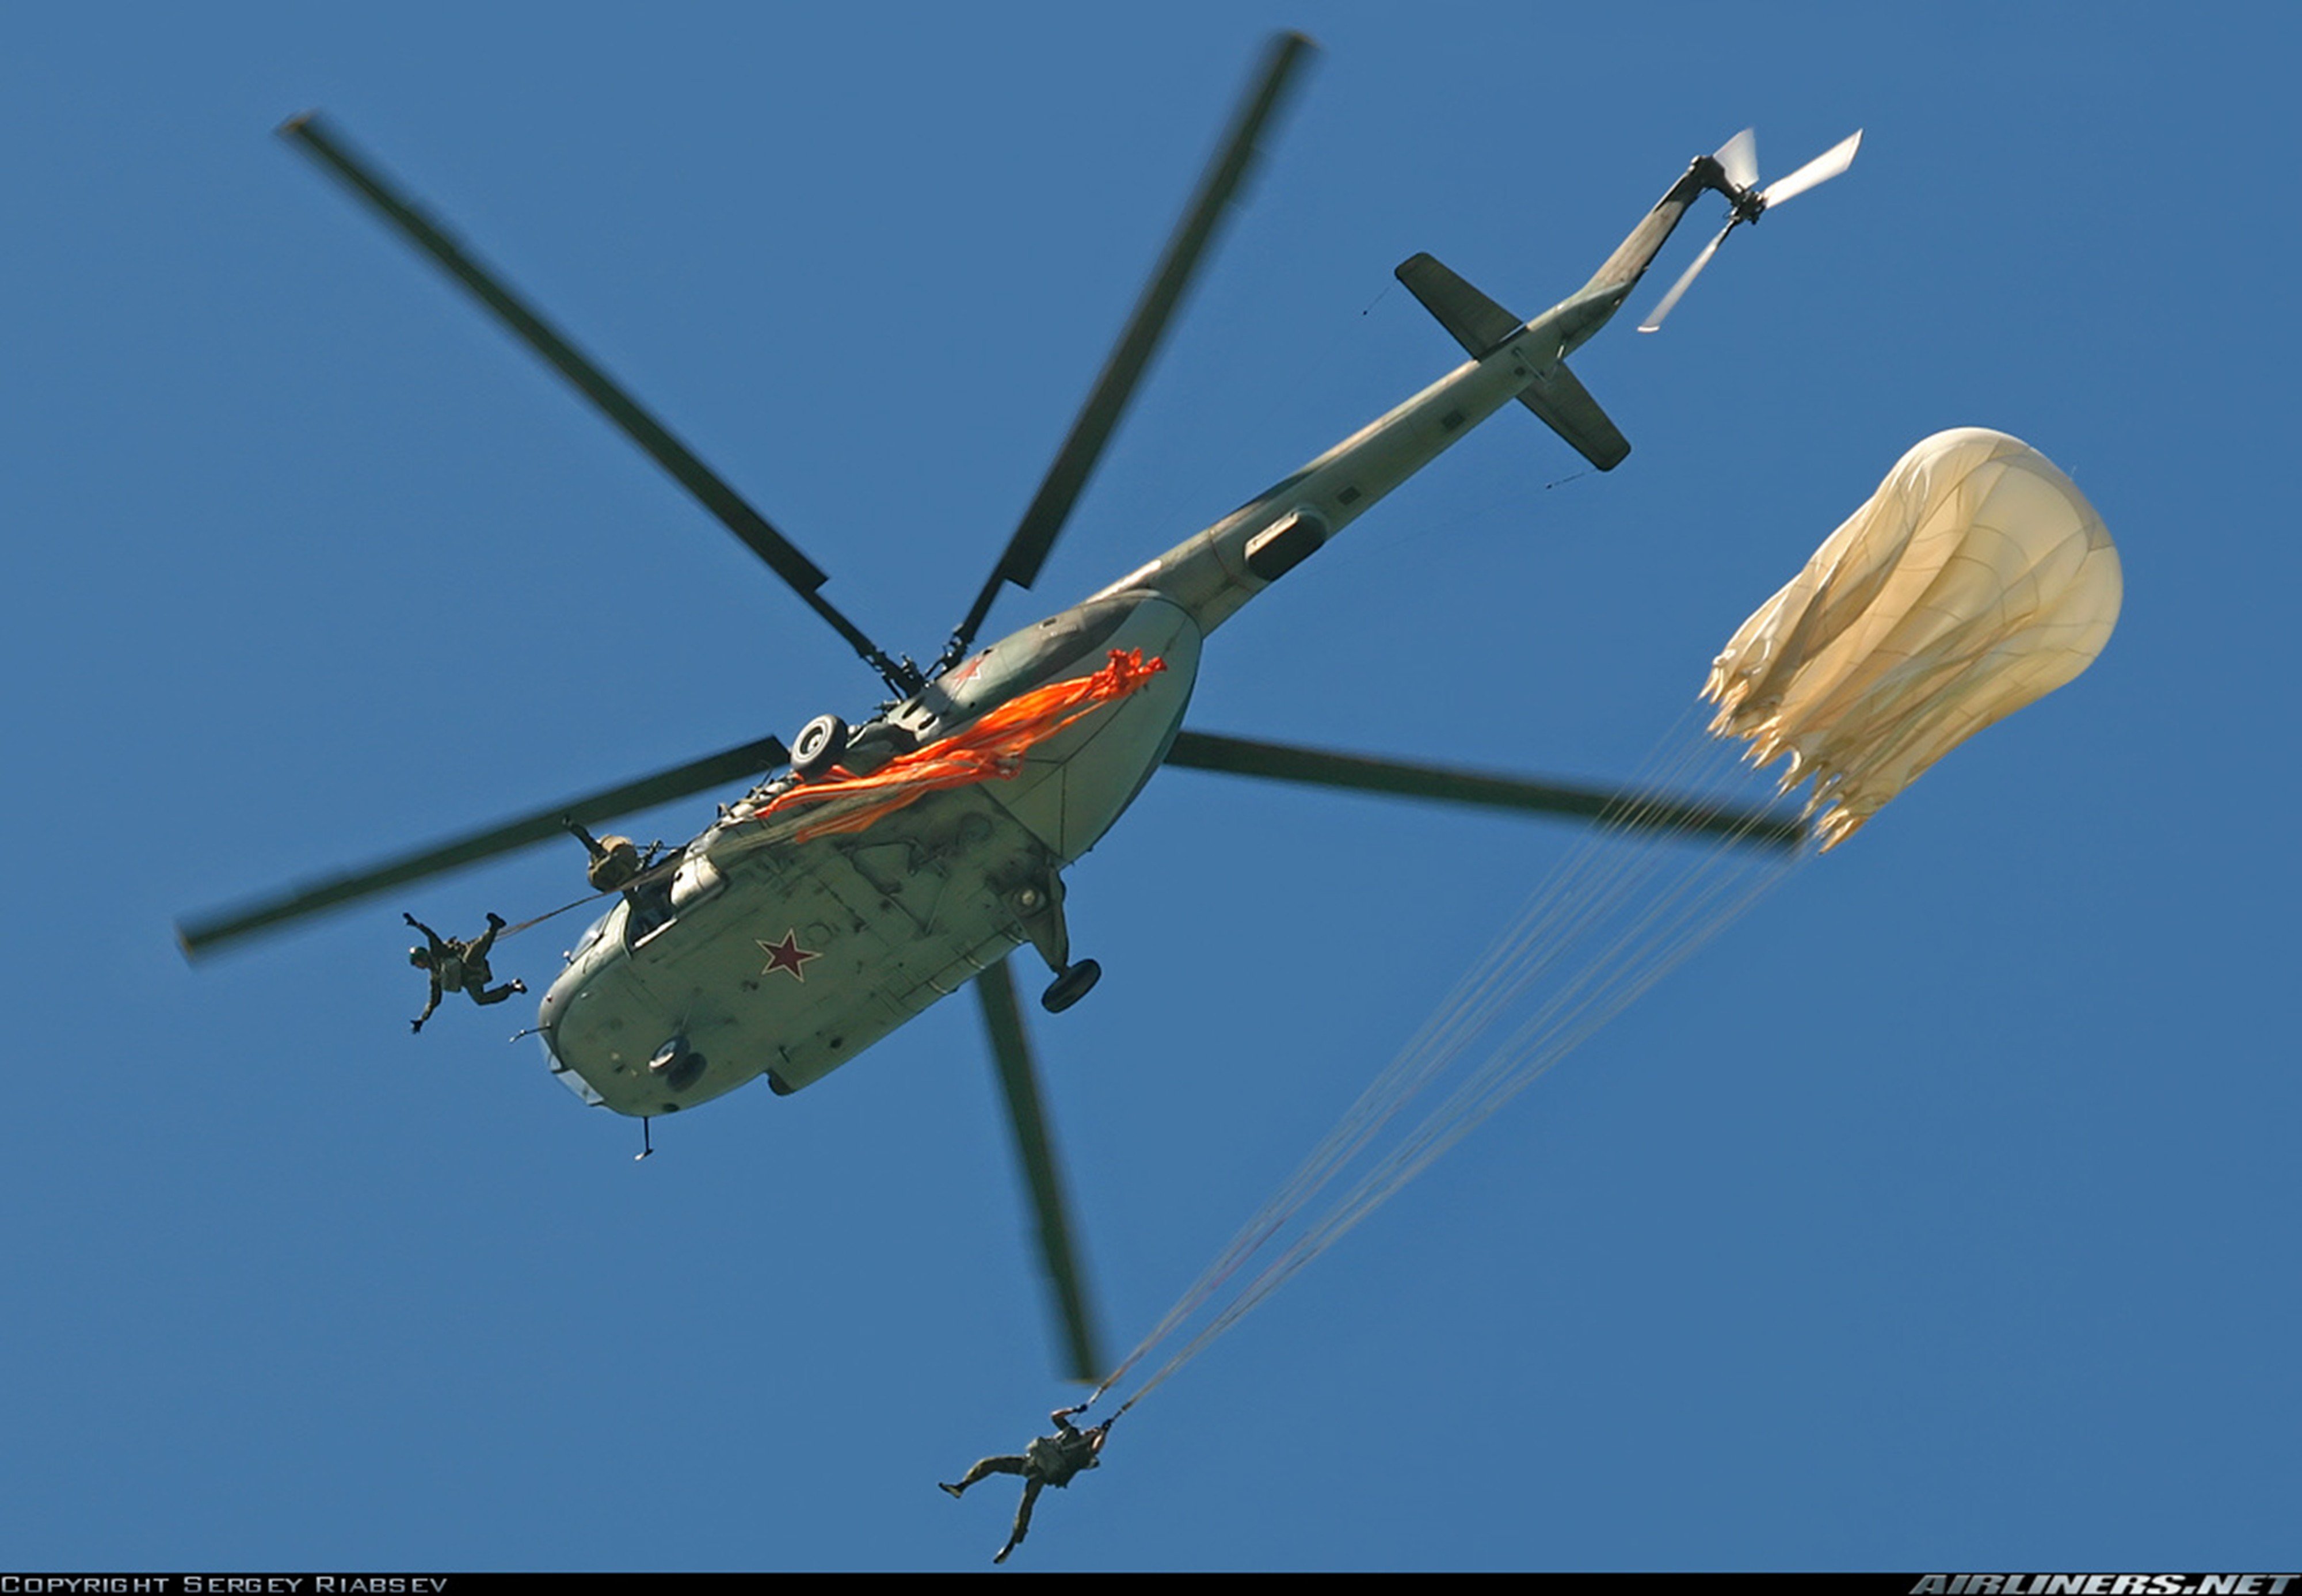 russian, Red, Star, Russia, Helicopter, Aircraft, Harnesses, Military, Army Wallpaper